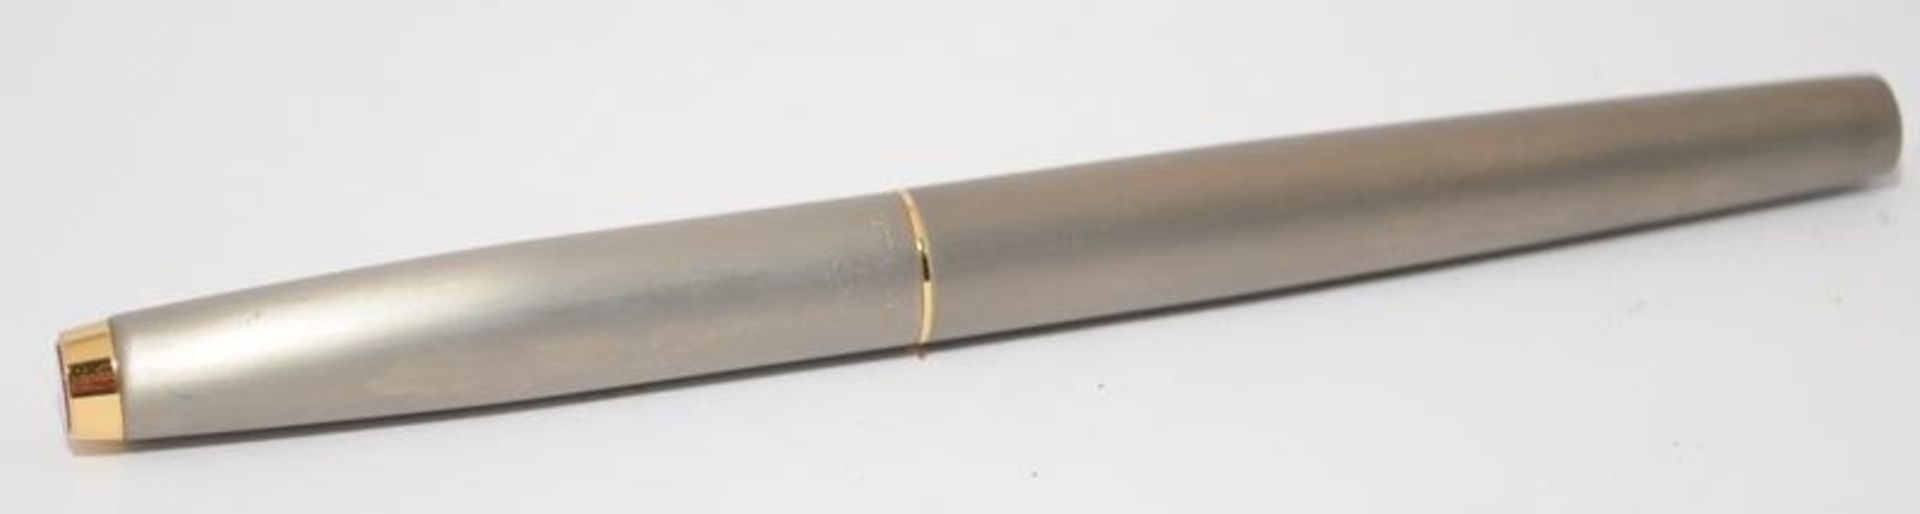 Rare Parker T1 titanium, made to celebrate the first moon landings. Near mint condition. Ref. 183 - Image 2 of 7